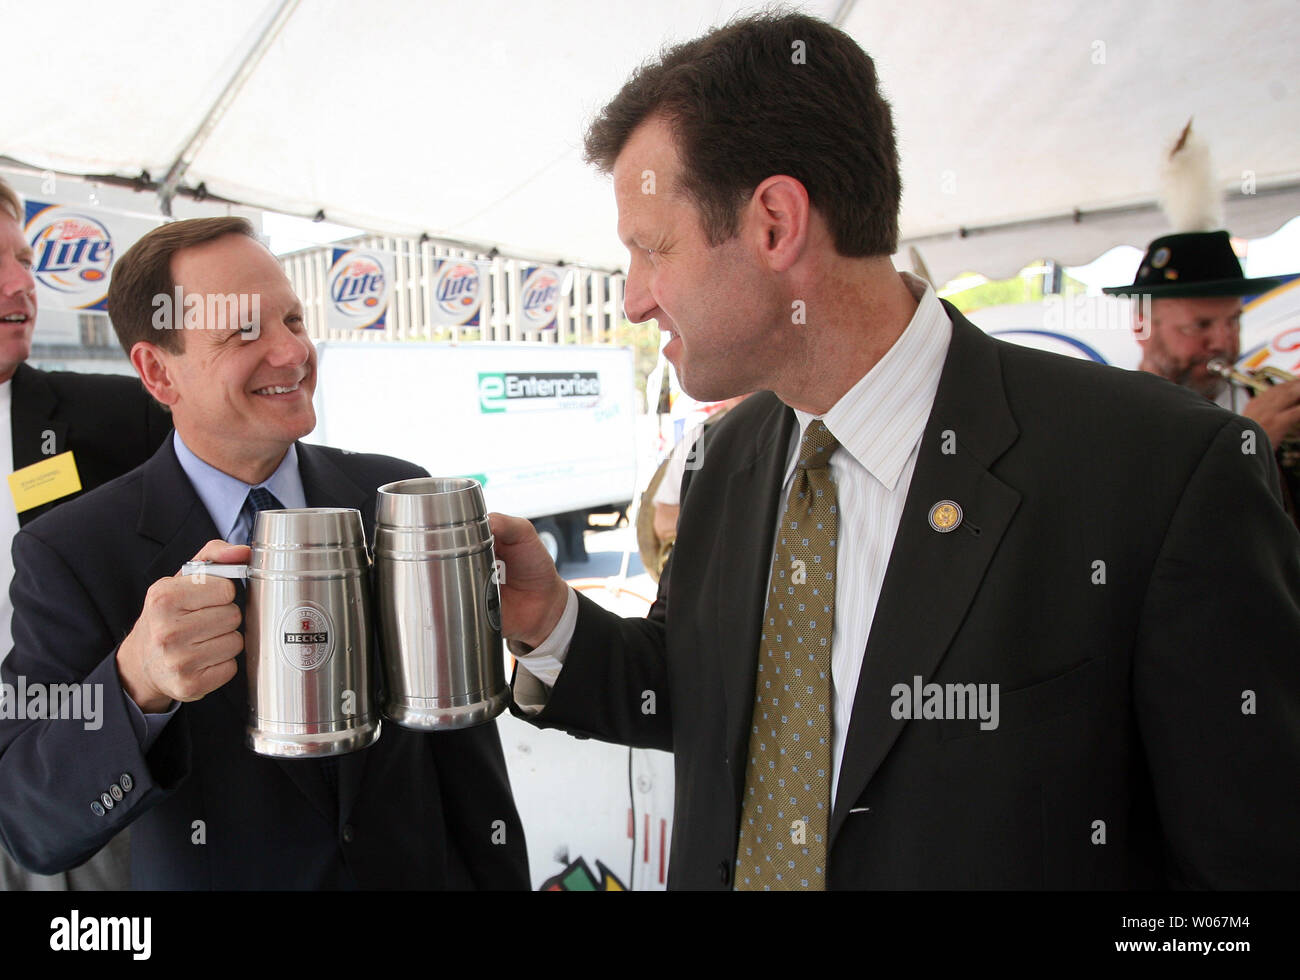 St. Louis Mayor Francis Slay (L) toasts U.S. Rep. Russ Carnahan as the St. Louis Strassenfest opens in downtown St. Louis on August 4, 2006. The three-day event celebrates German hertiage with beer, brats and alot of umpah music. (UPI Photo/Bill Greenblatt) Stock Photo